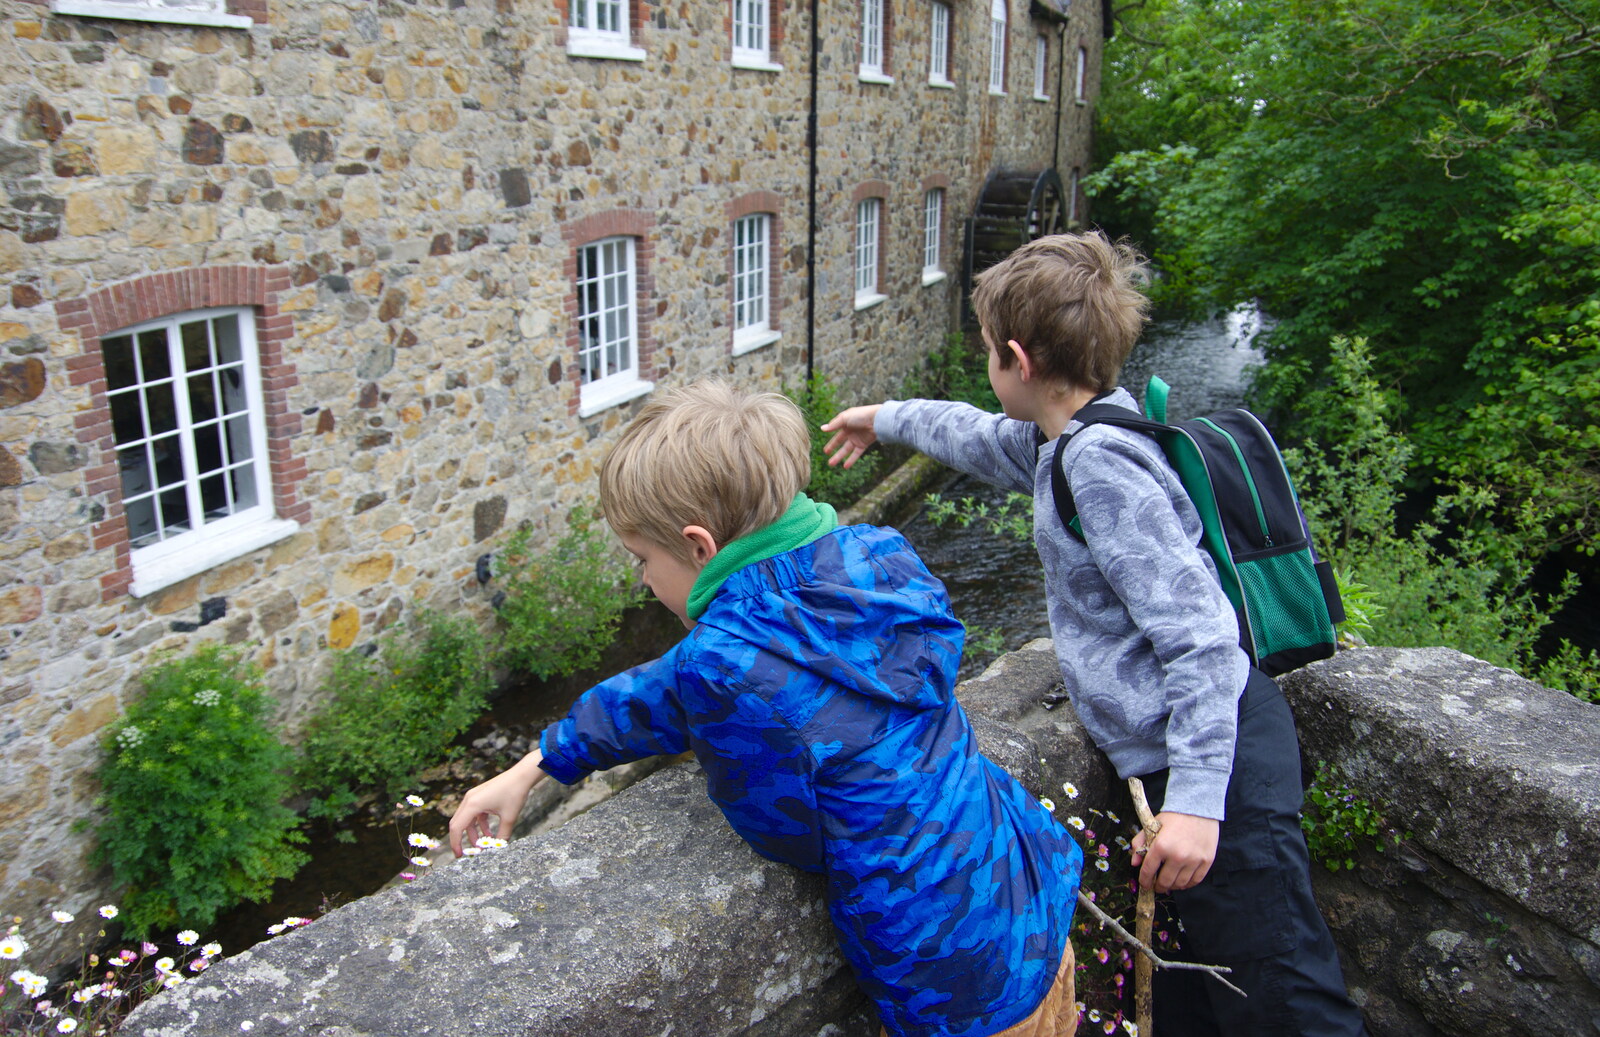 The boys look into the river from The Tom Cobley and a Return to Haytor, Bovey Tracey, Devon - 27th May 2019